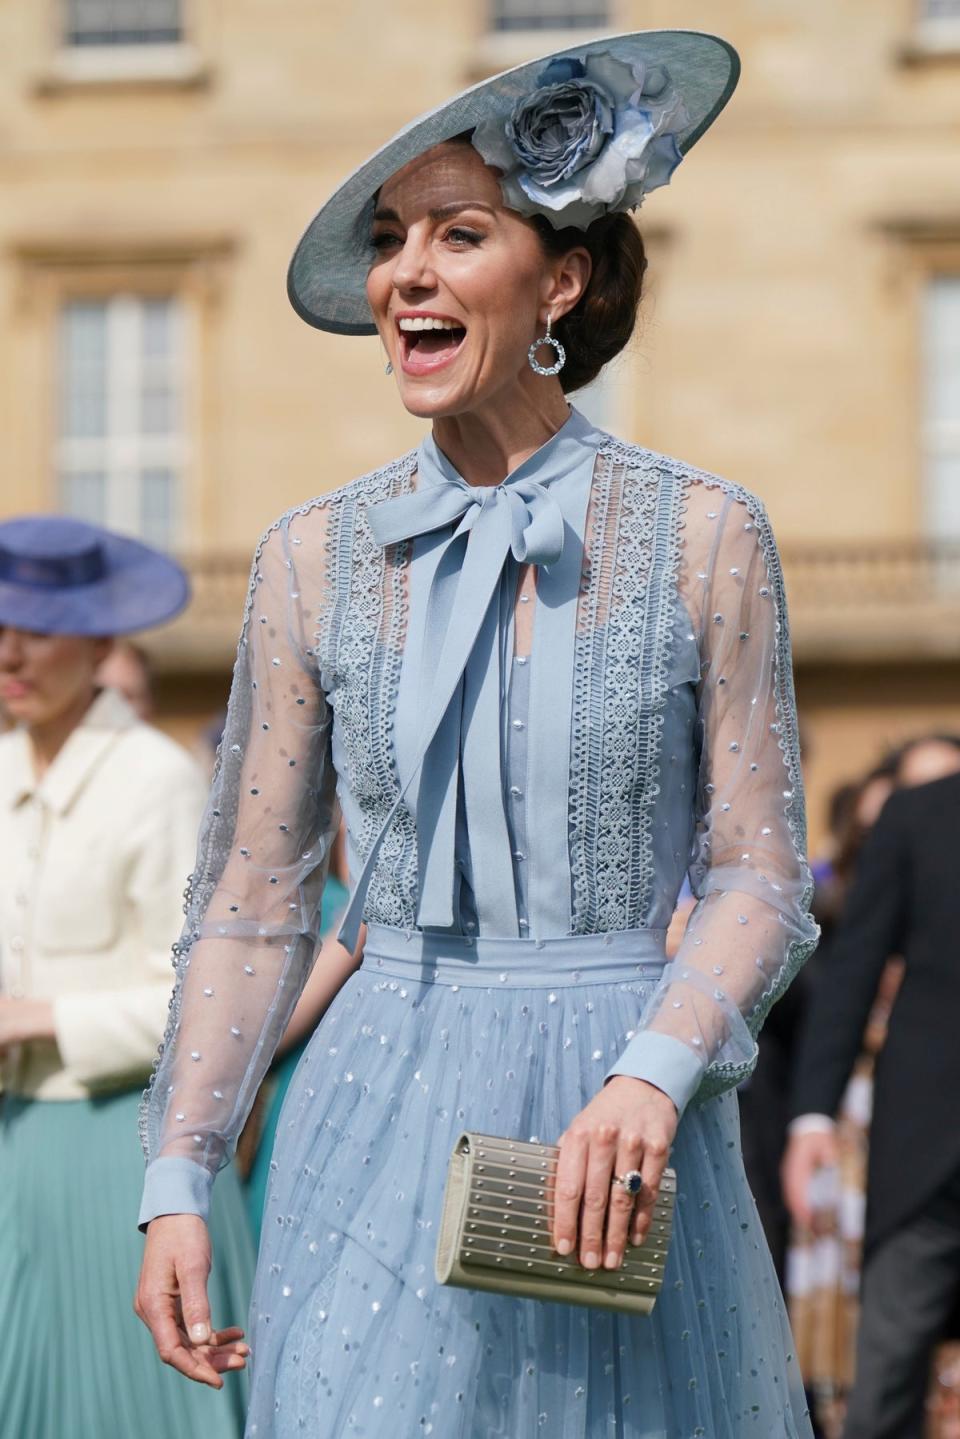 The Princess of Wales at the  Buckingham Palace garden party (AP)